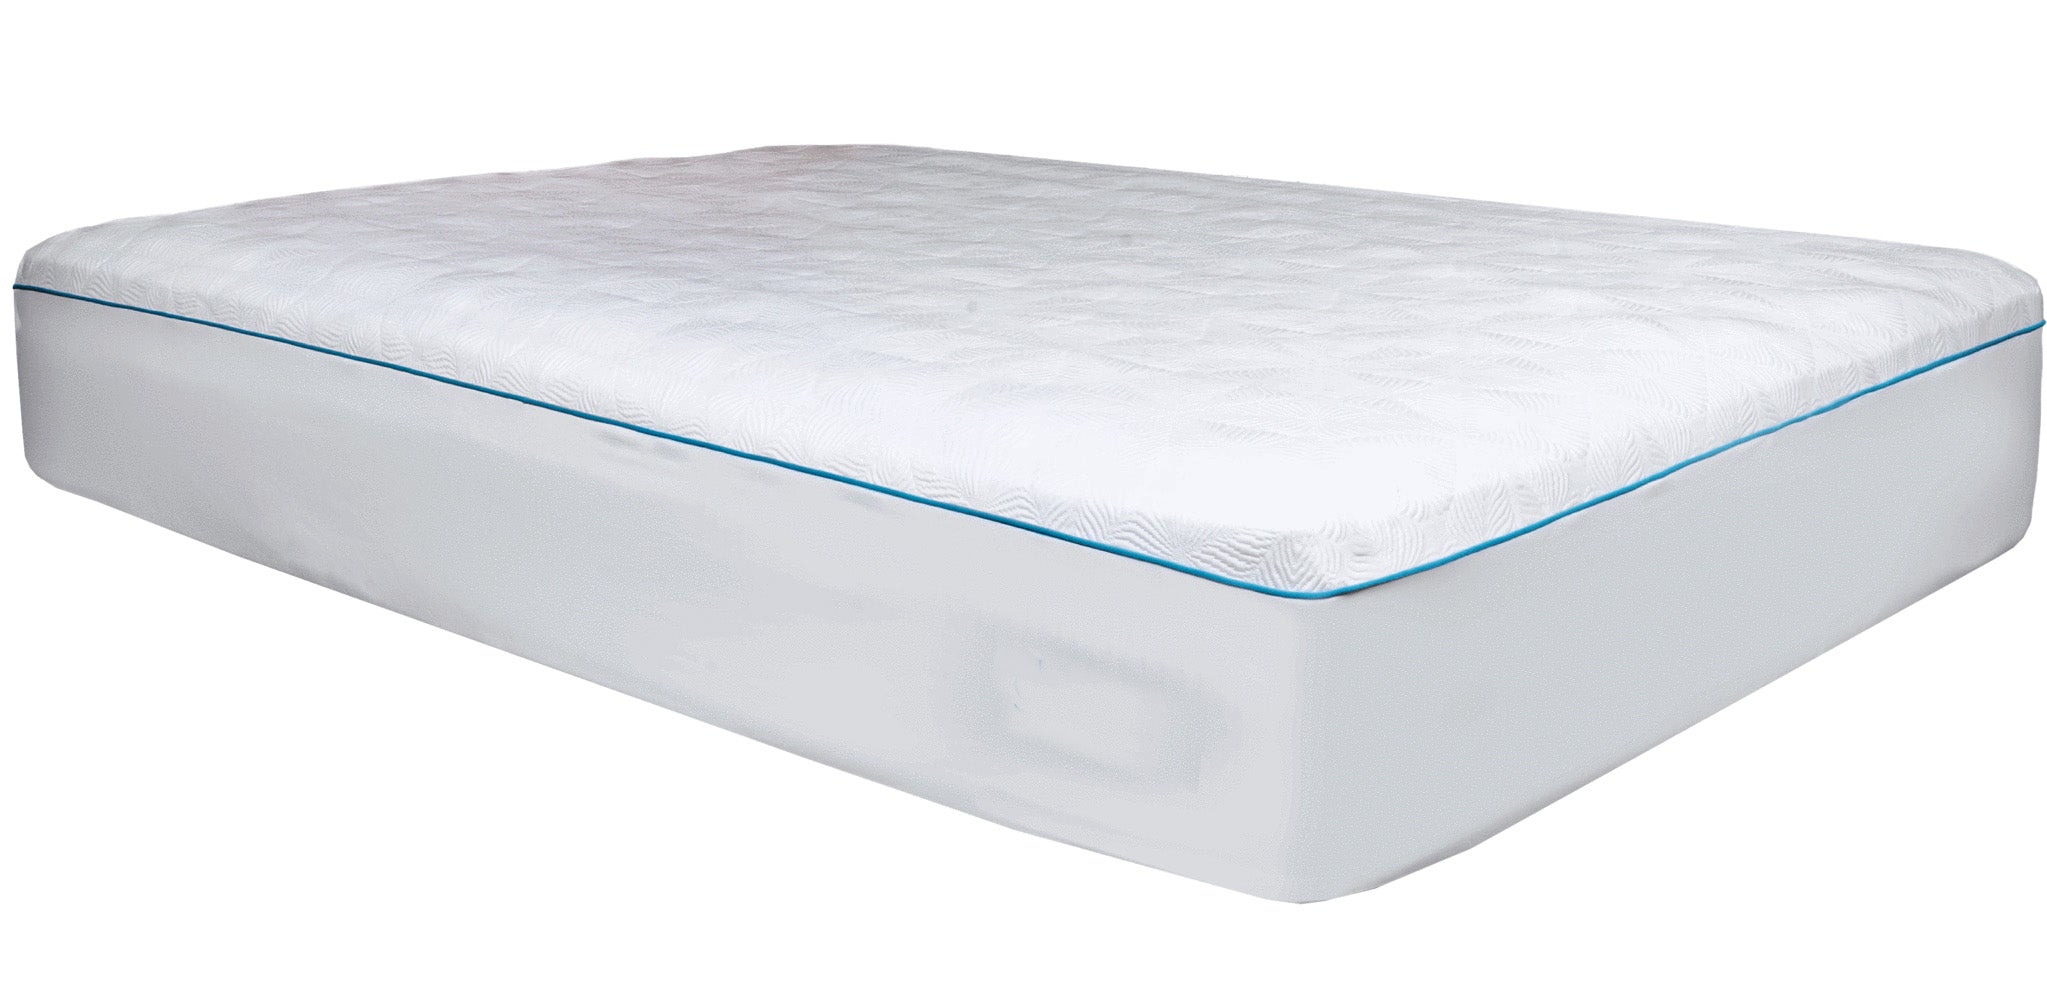 glaciertex double ice cooling mattress protector